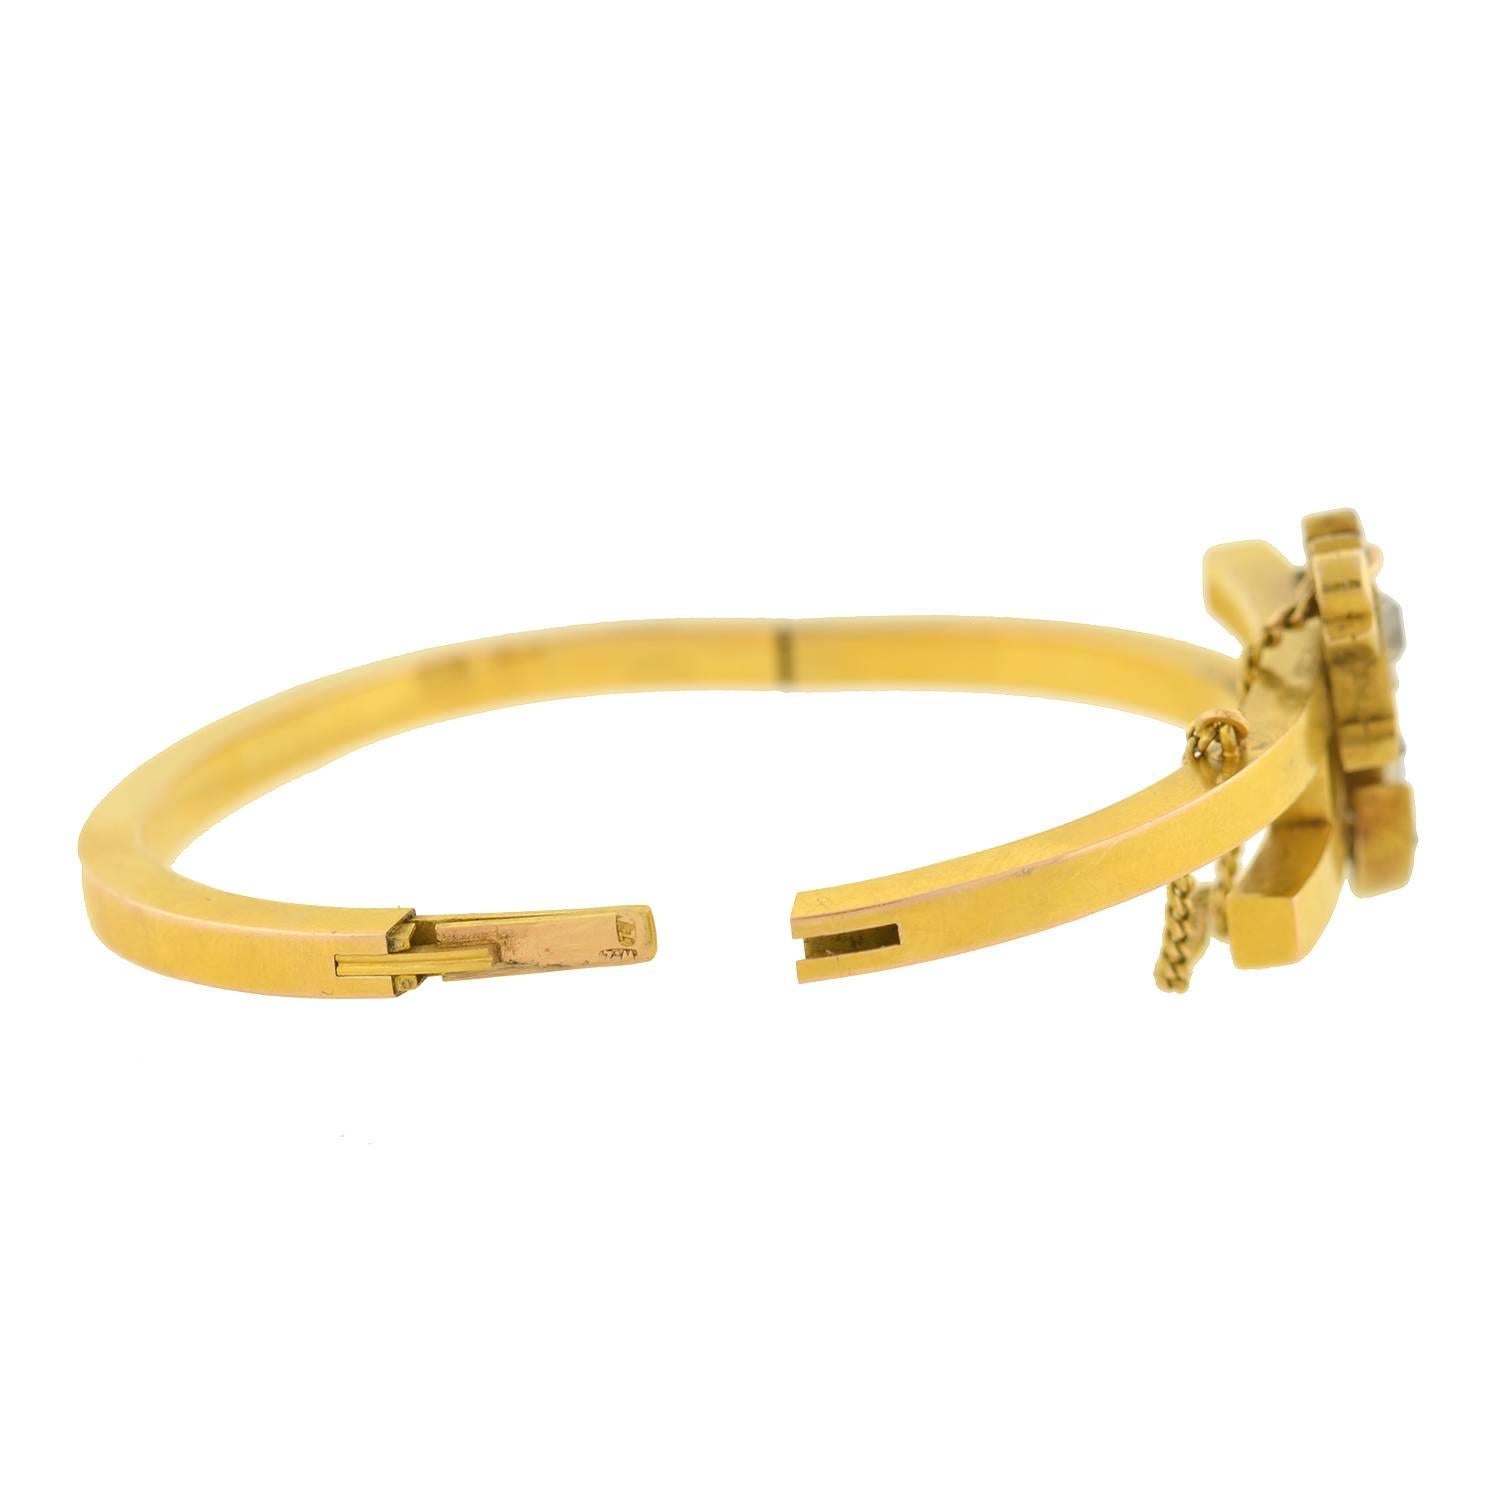 An incredible diamond anchor bracelet from the Victorian (ca1880) era! This beautiful bangle is crafted in 15kt gold (indicating English origin), and has a stylish bypass design that intersects at the front. Decorating the center is a stunning